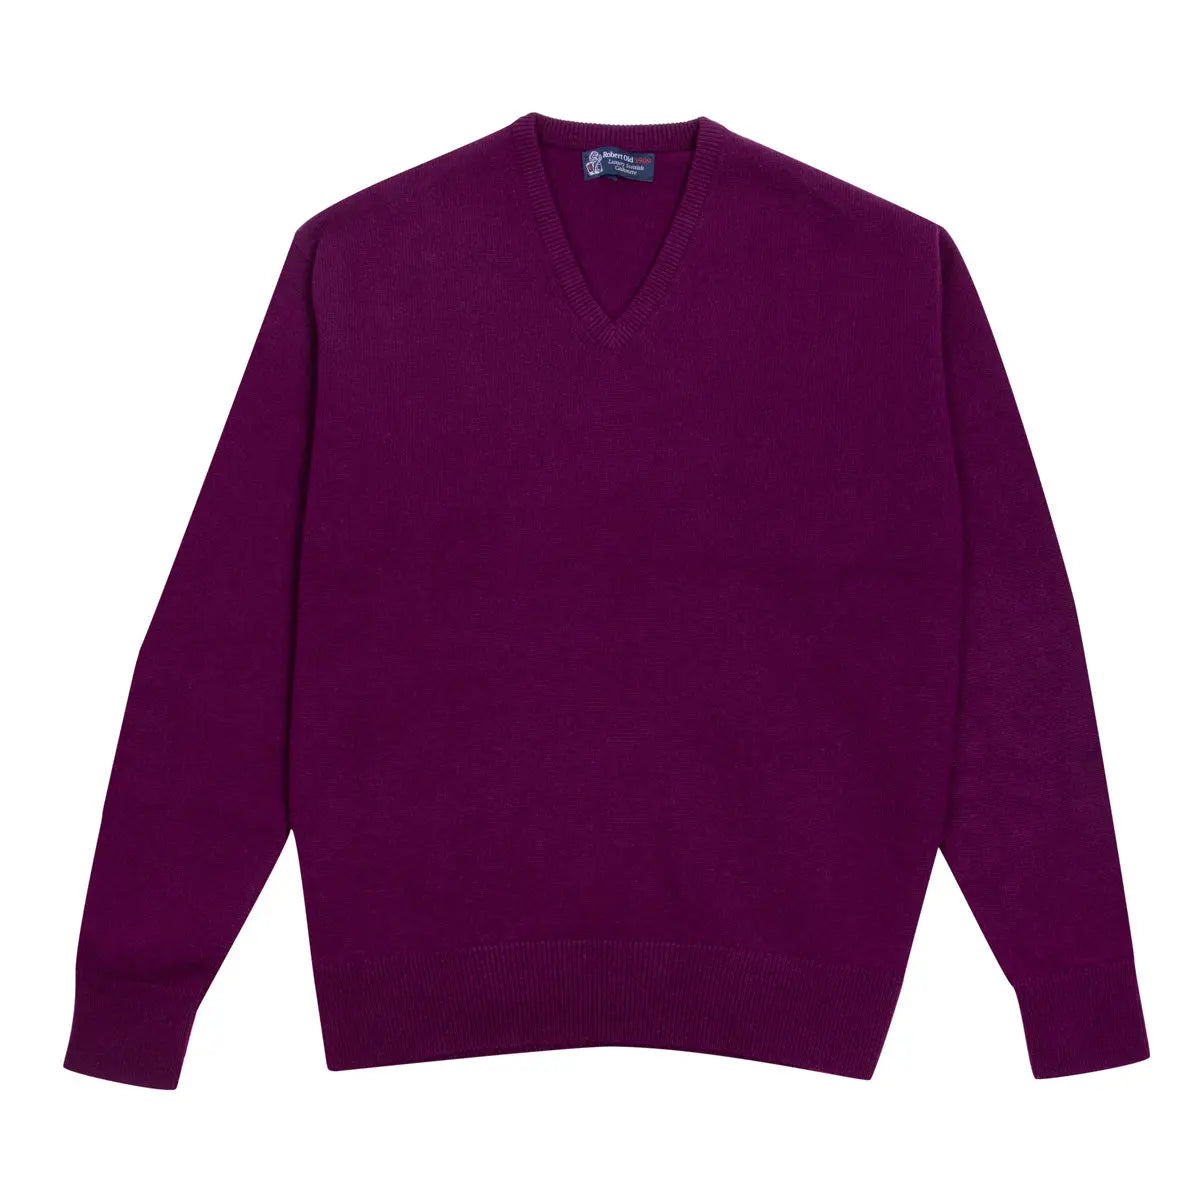 Beetroot Tobermorey 4ply V-Neck Cashmere Sweater Robert Old